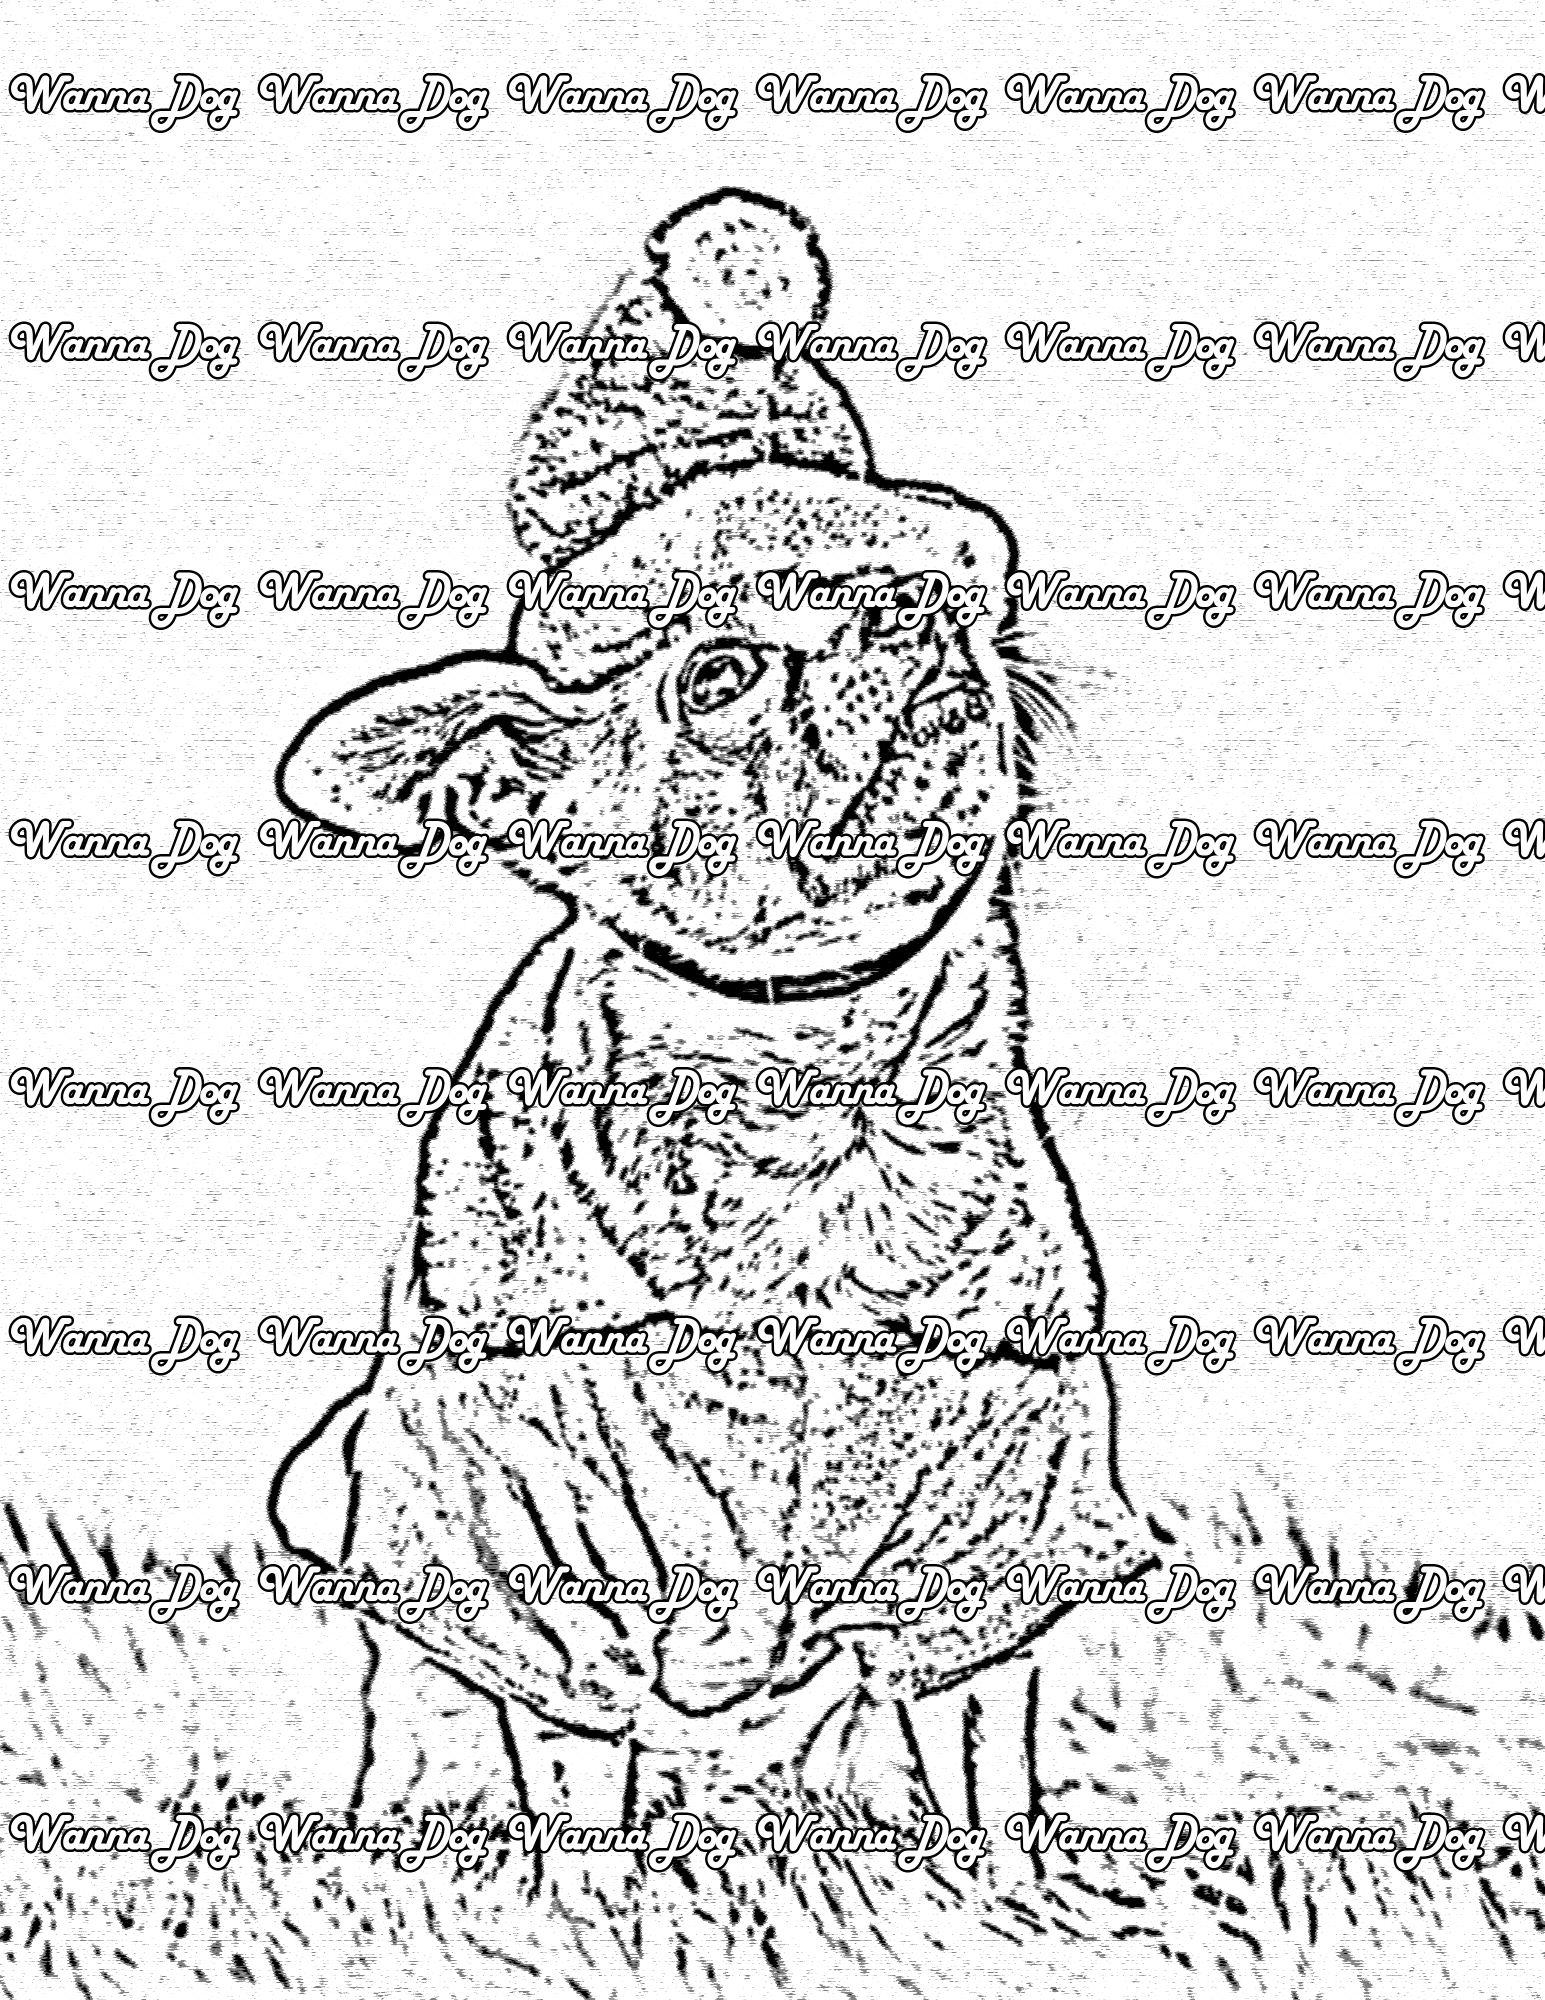 Chihuahua Coloring Page of a Chihuahua with a Santa suit